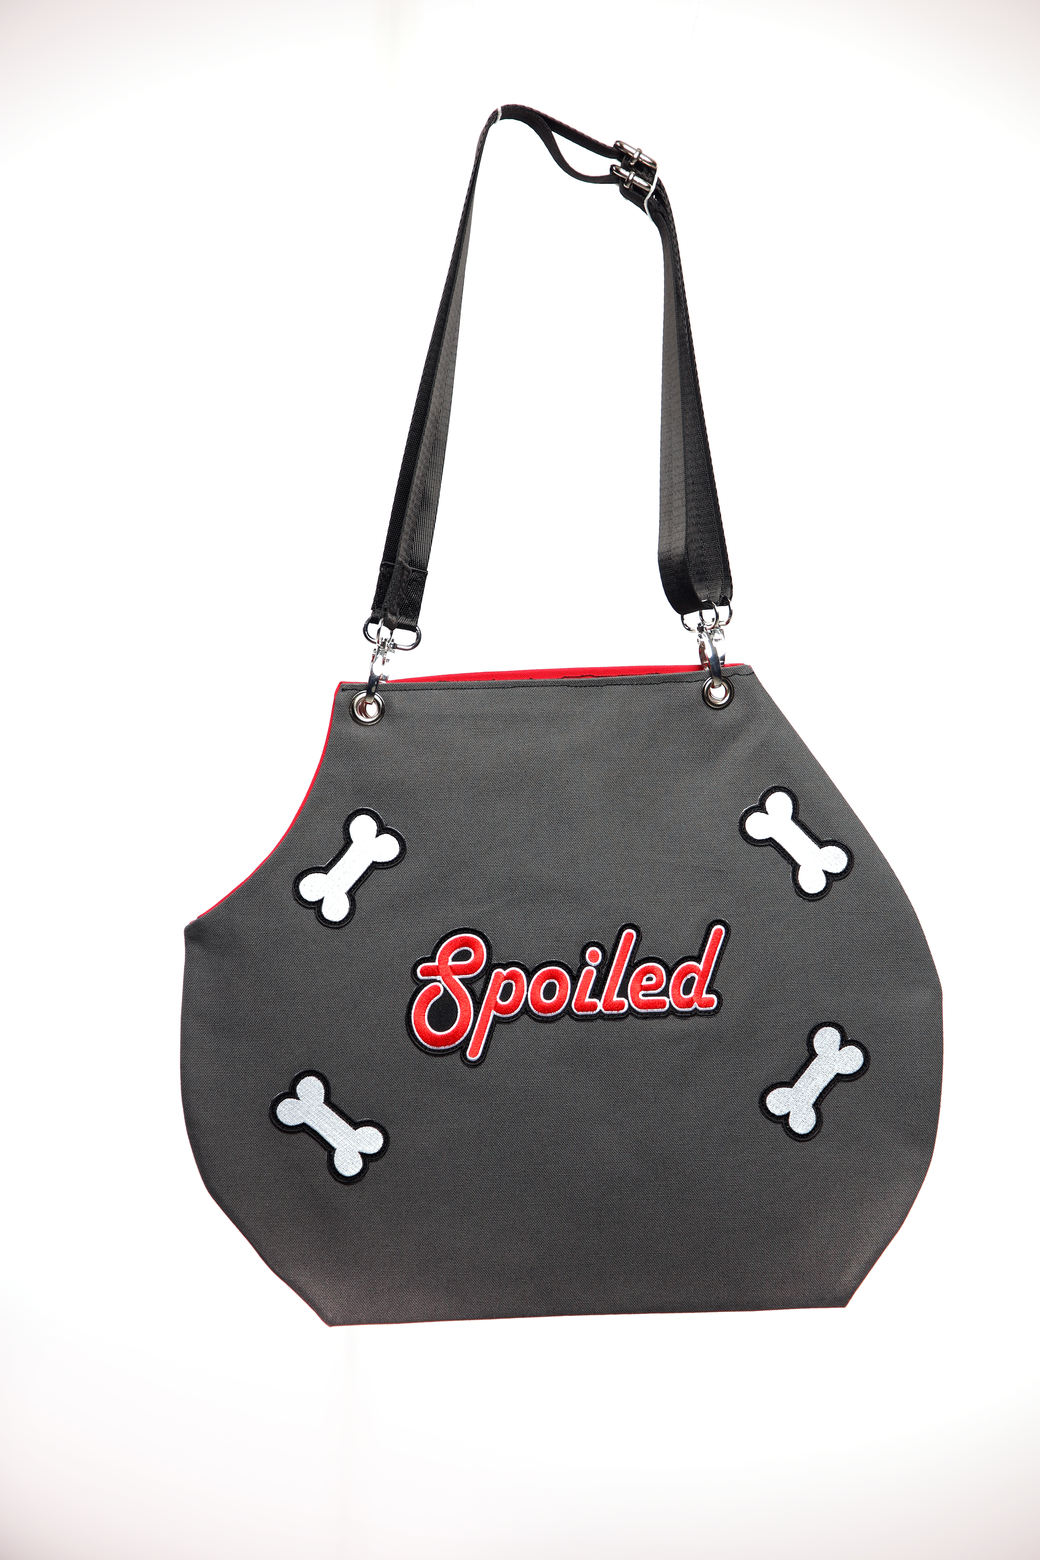 Spoiled Cut Out Tote Bag